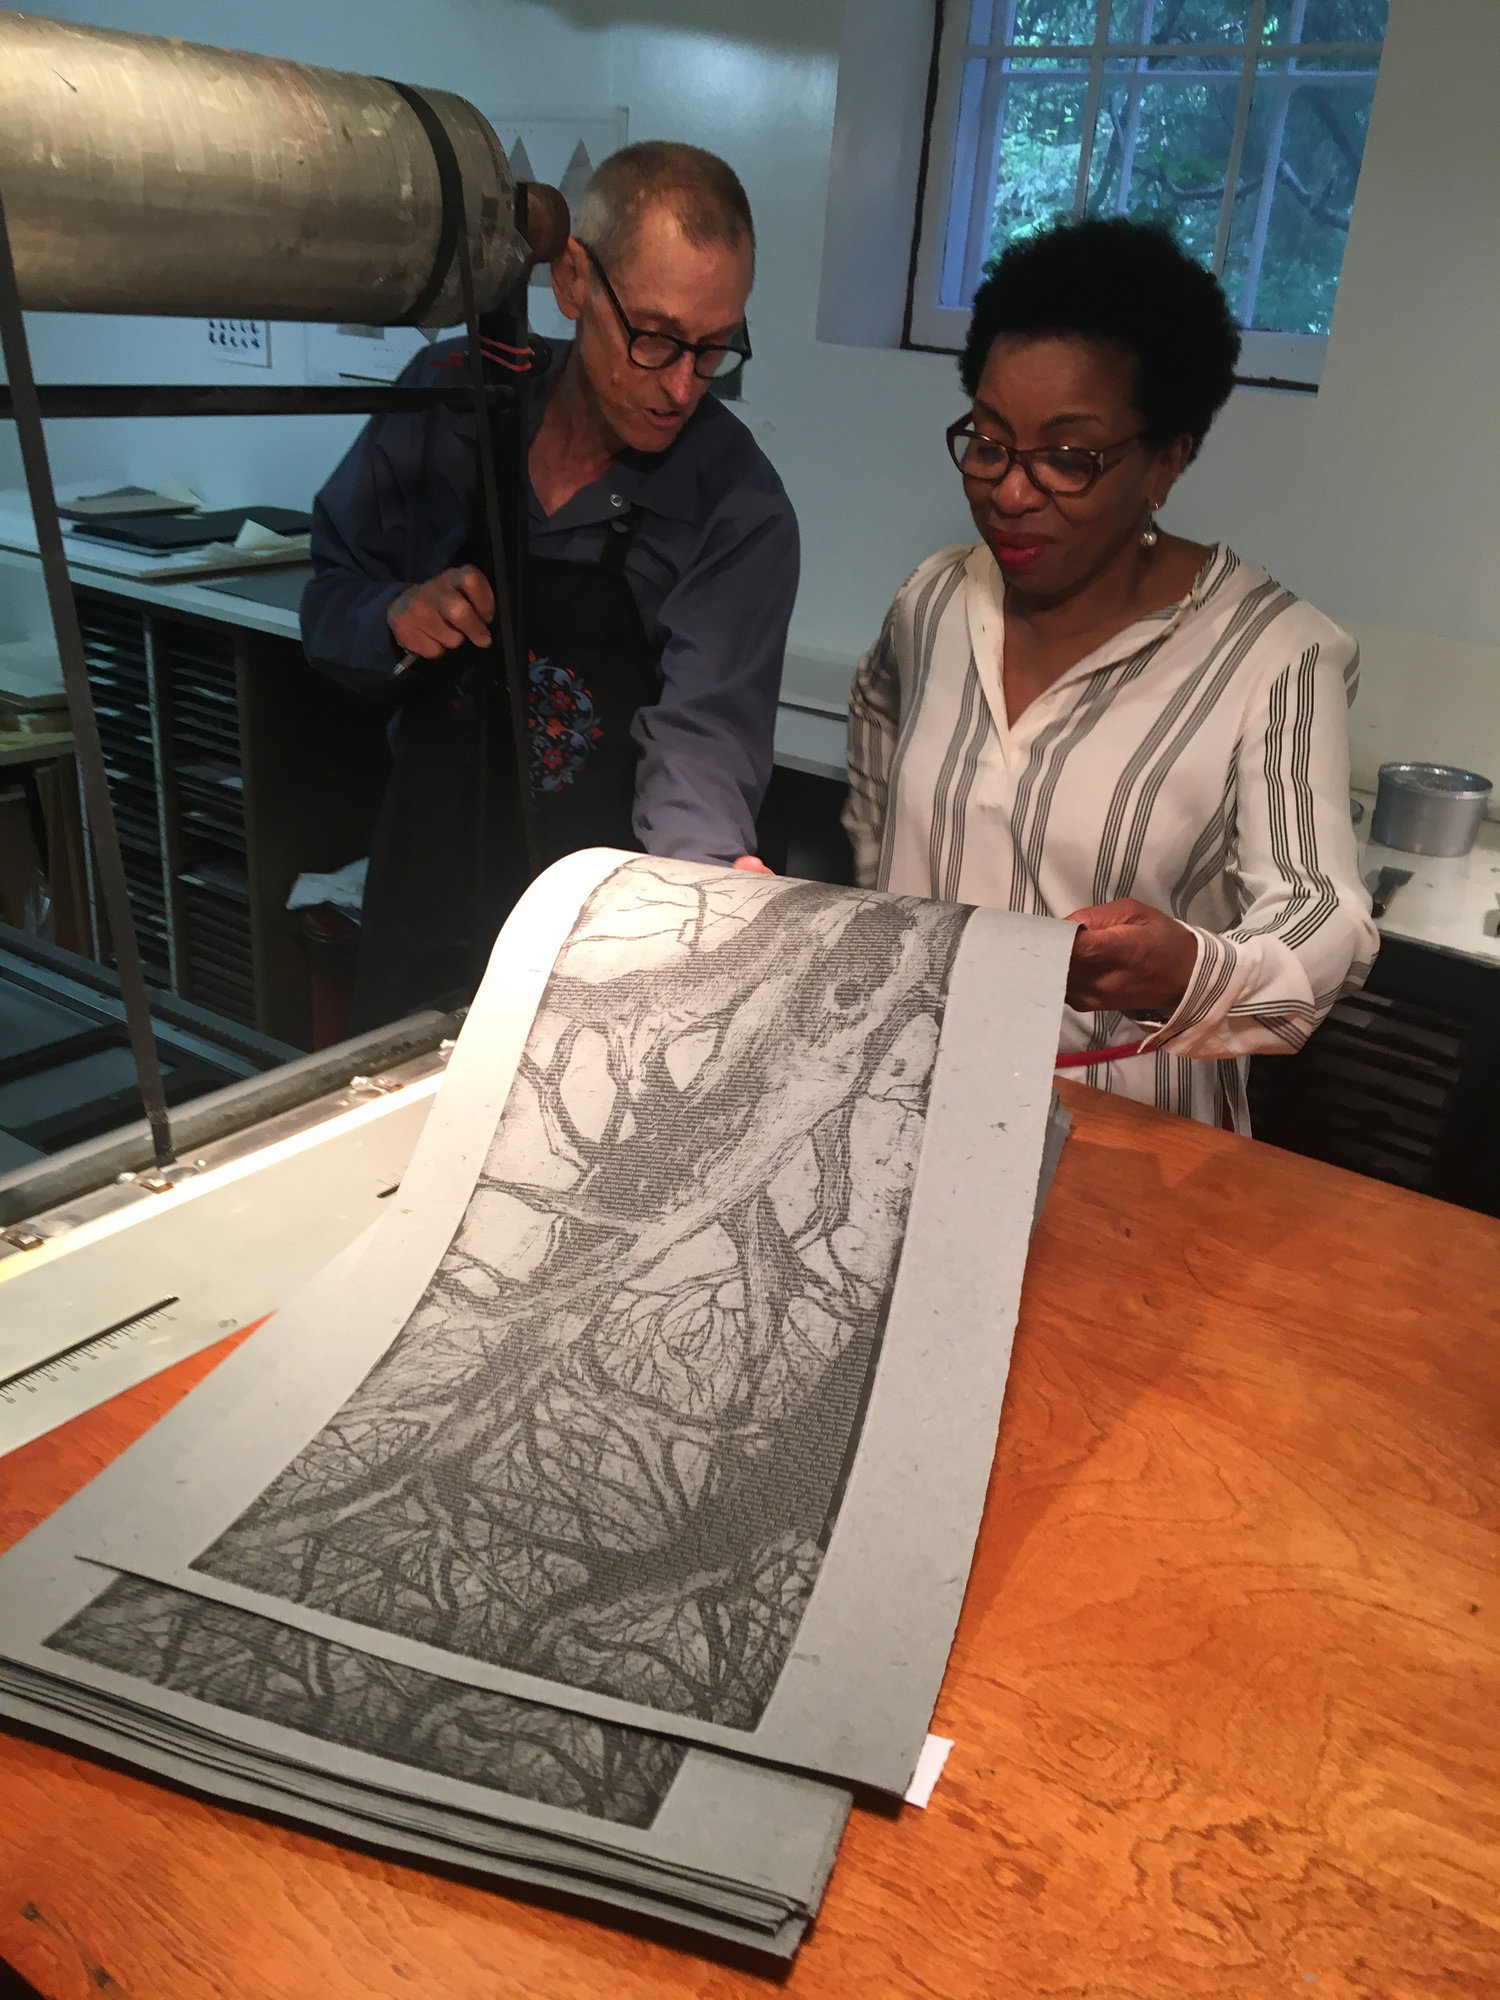 Shirley Ann Whitaker with printer, reviewing the Ashes to Ashes broadside